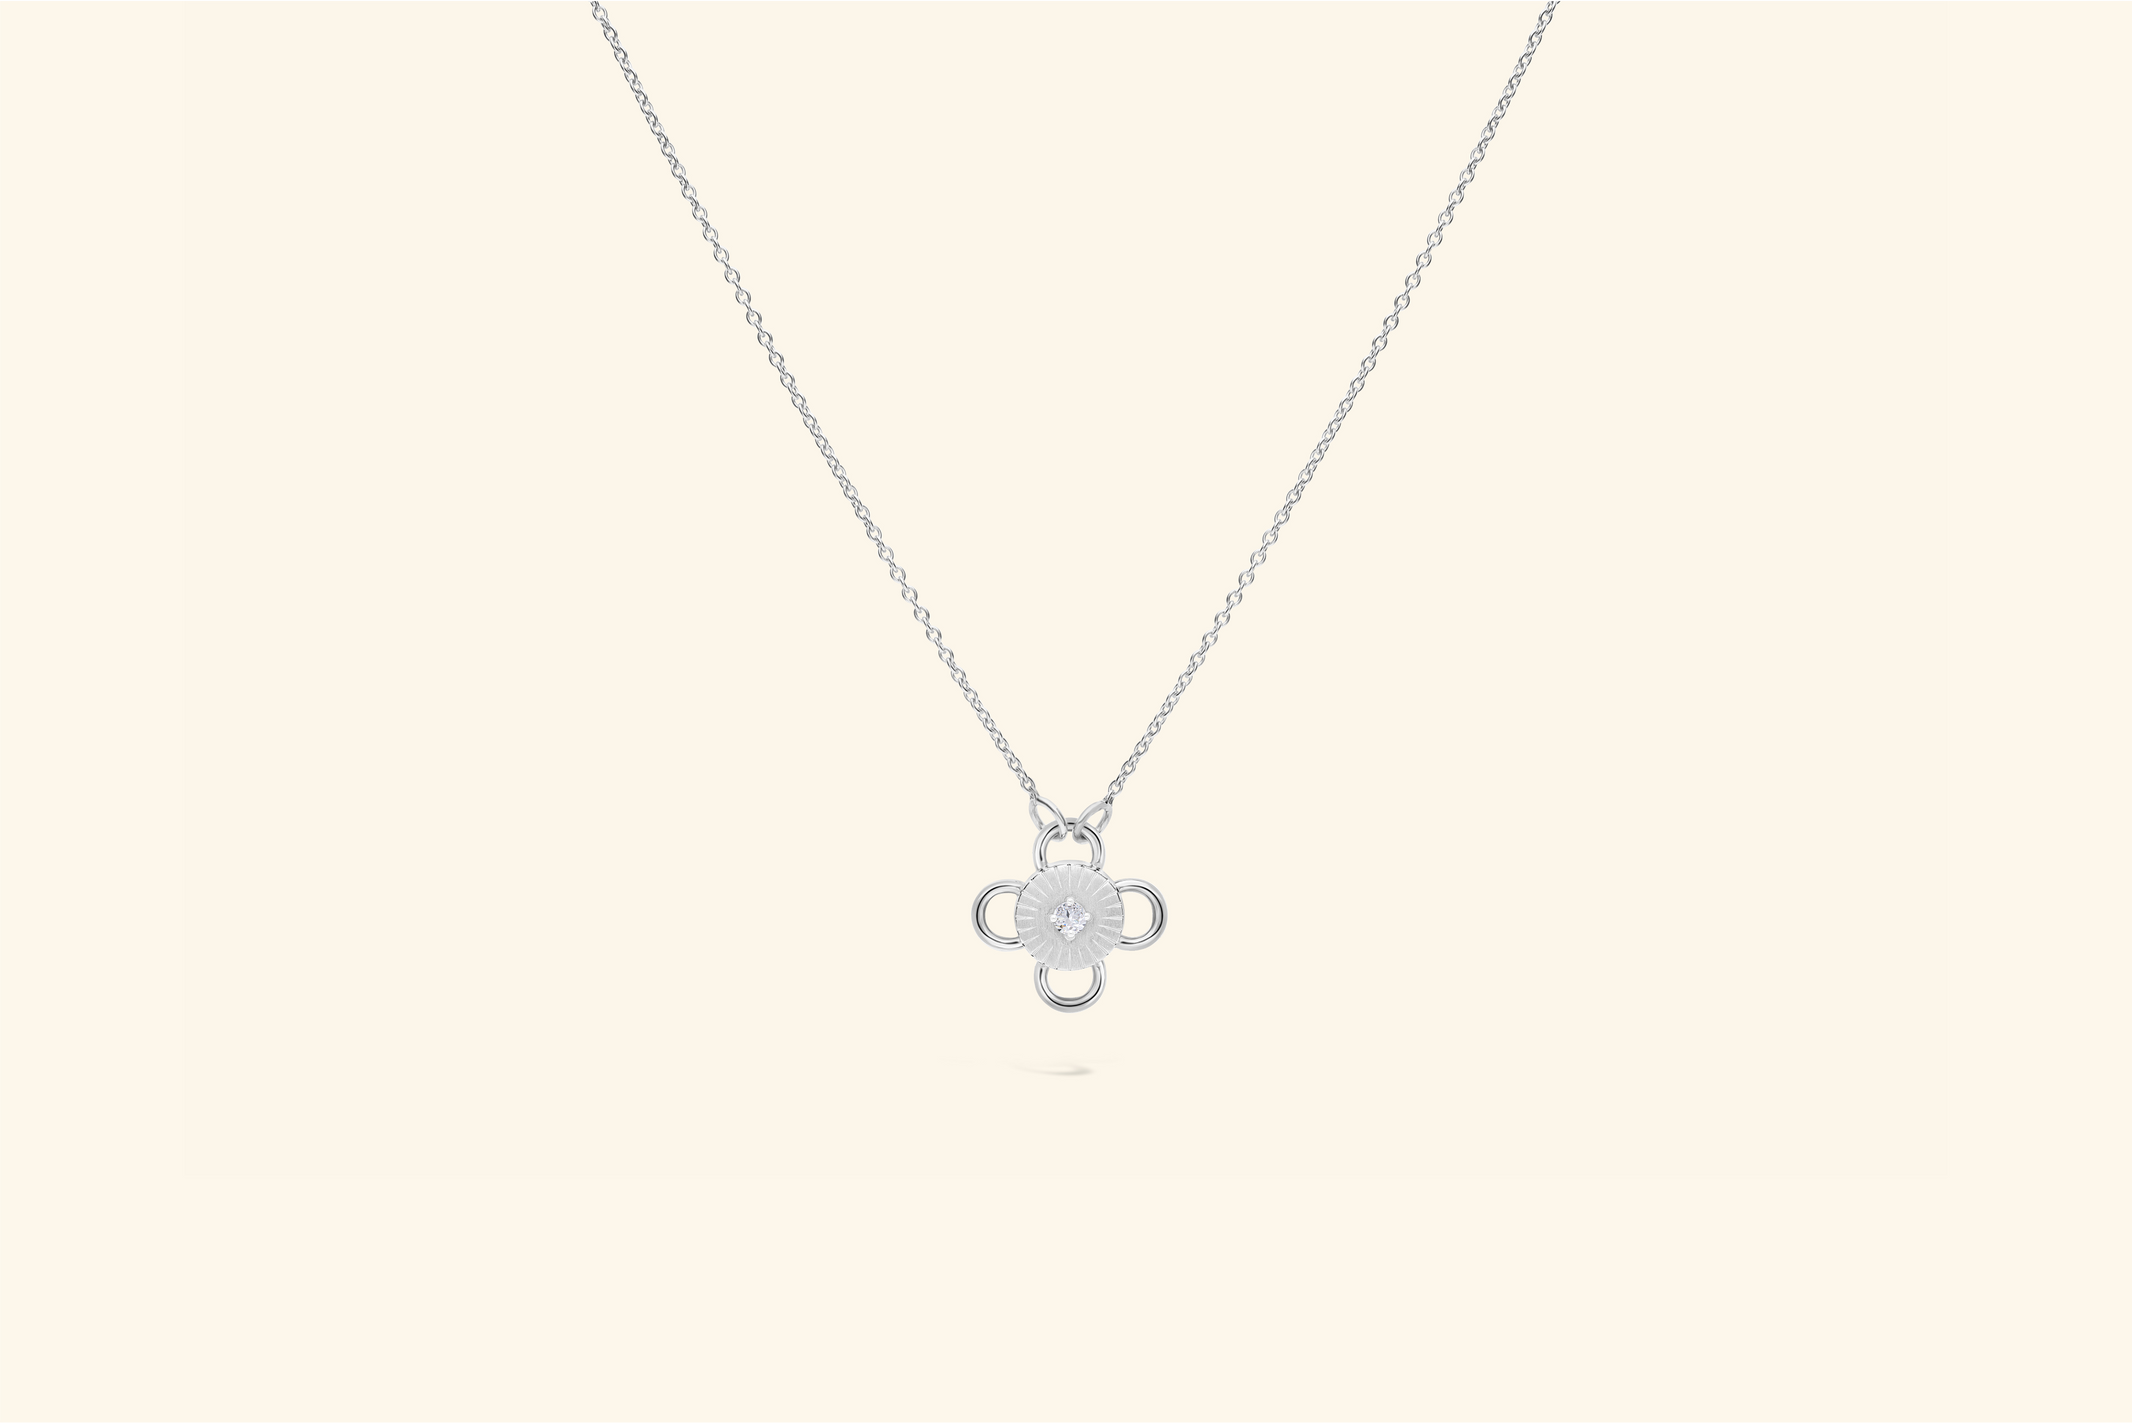 Baby Bolt Necklacea ~0.07 carat diamond set in recycled white gold.